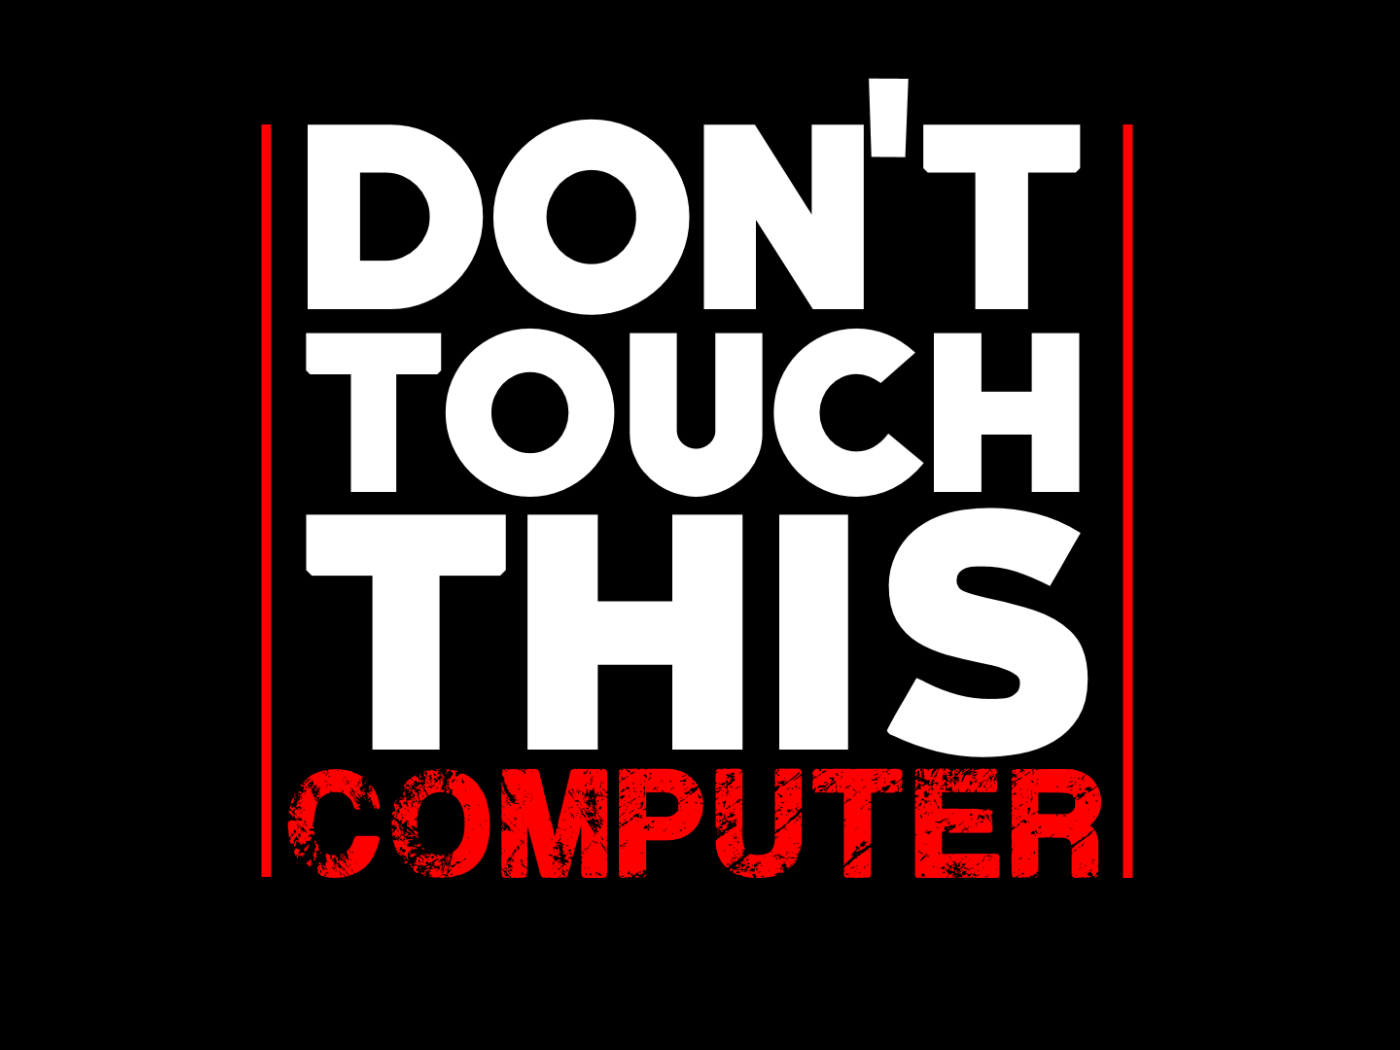 Not touch this computer